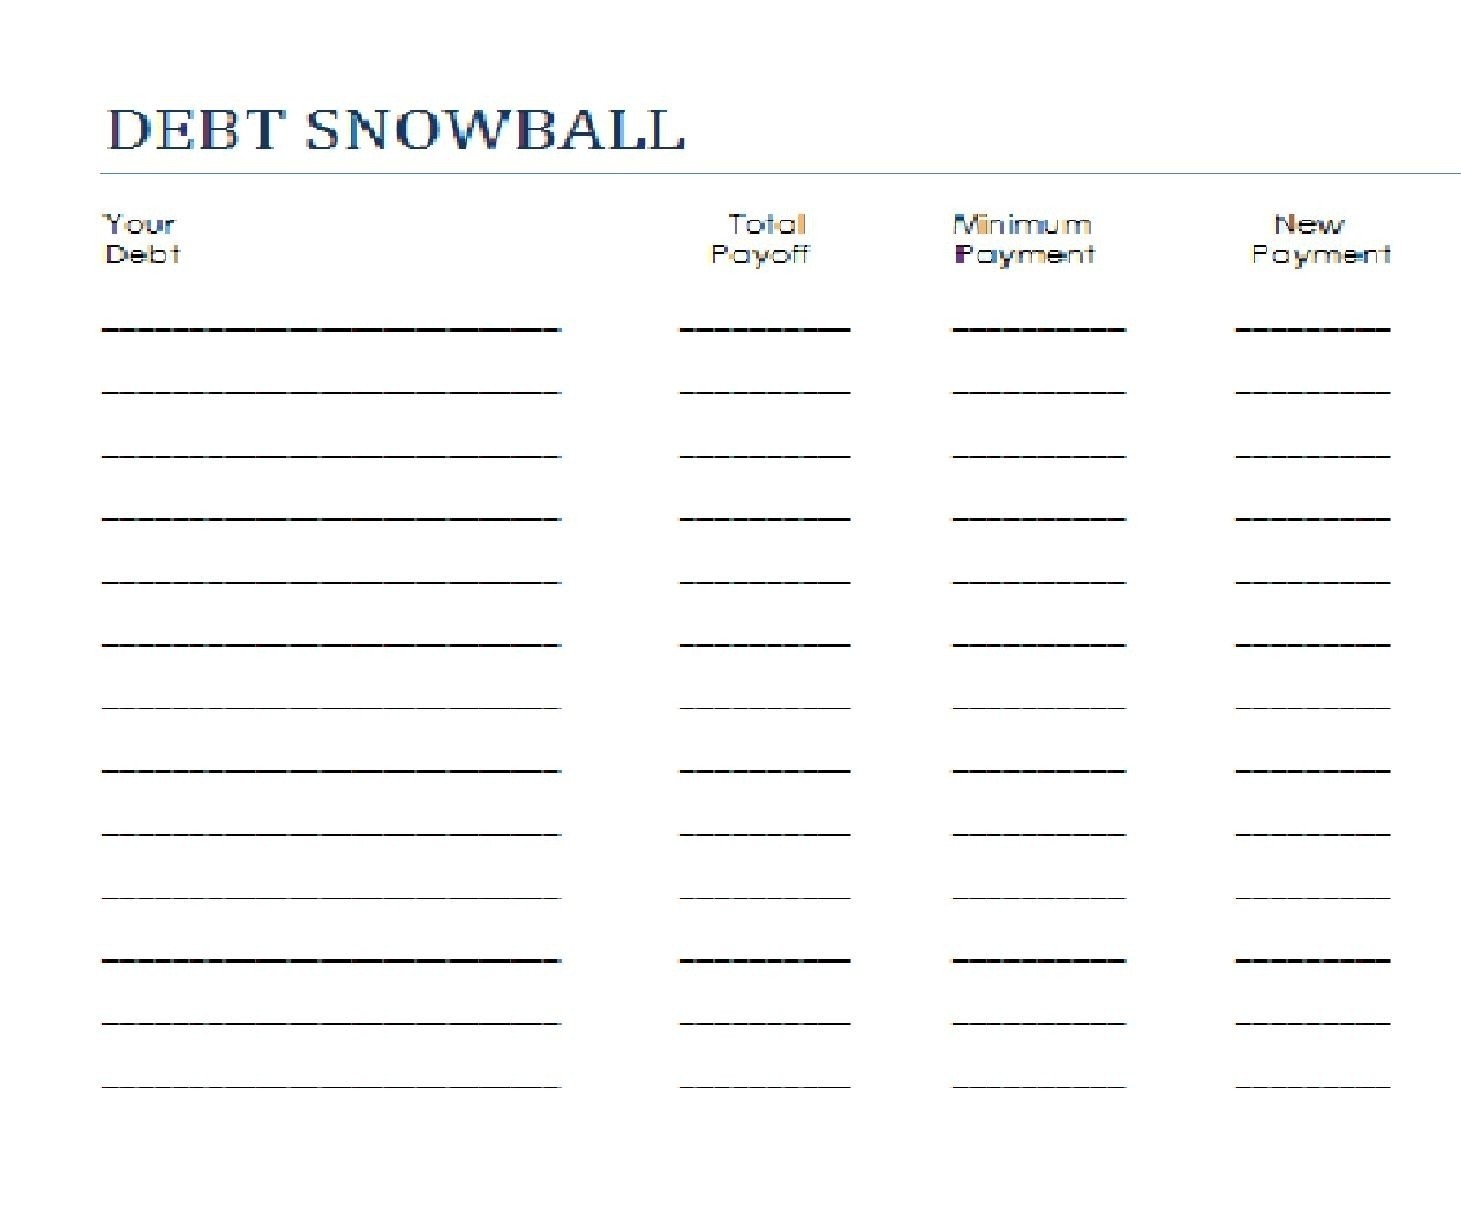 Dave Ramsey Debt Snowball Worksheet Worksheets For All Download Document Excel Spreadsheet